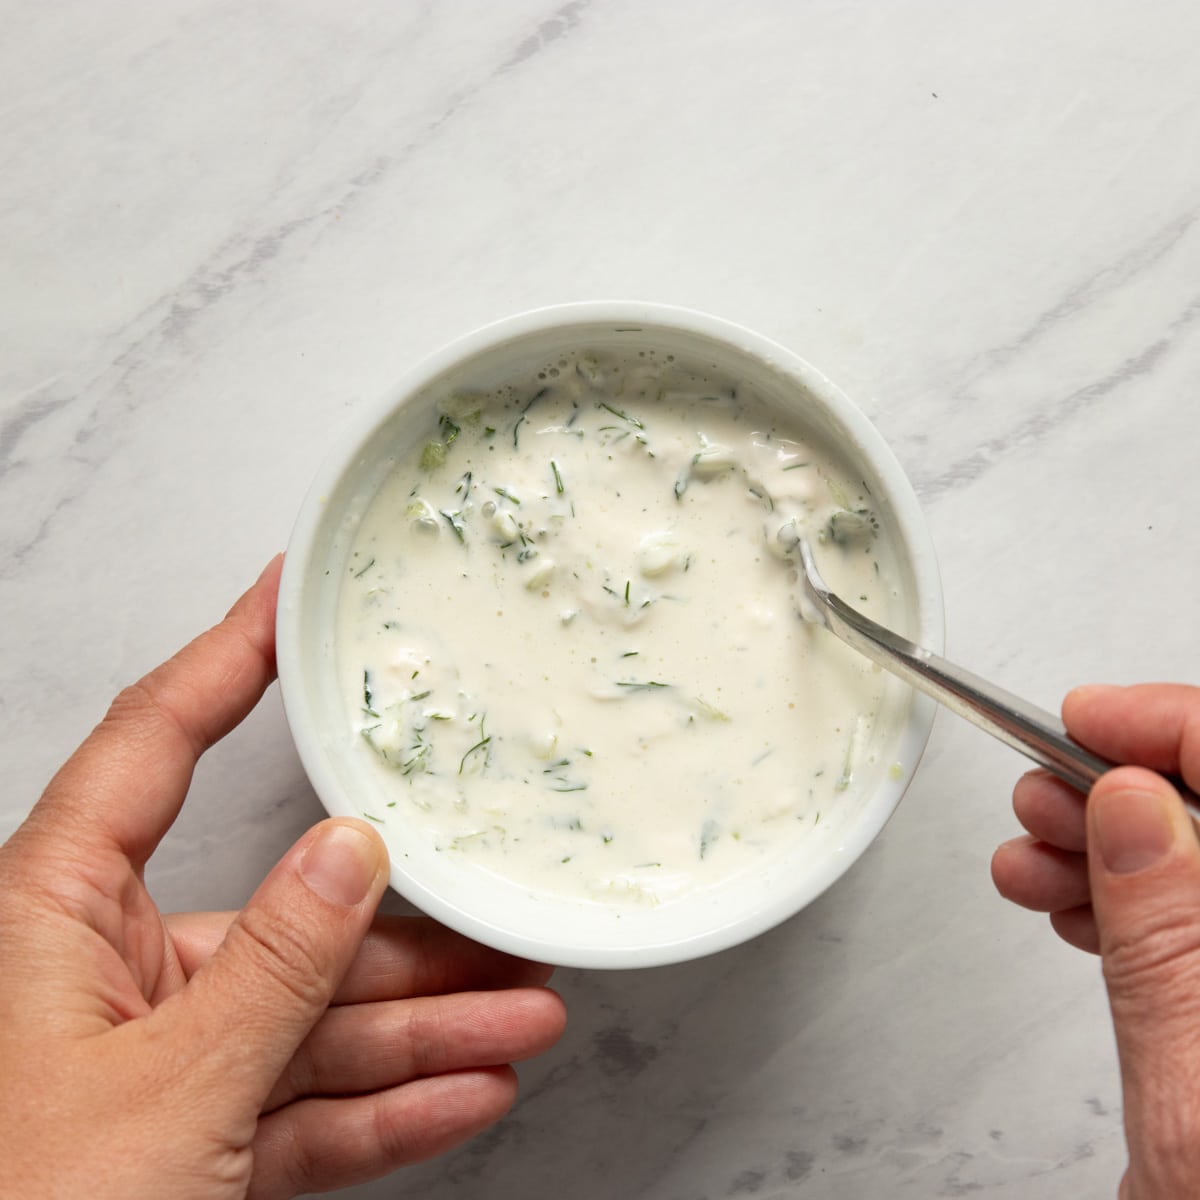 Whisking together a bowl of creamy cucumber dill sauce.